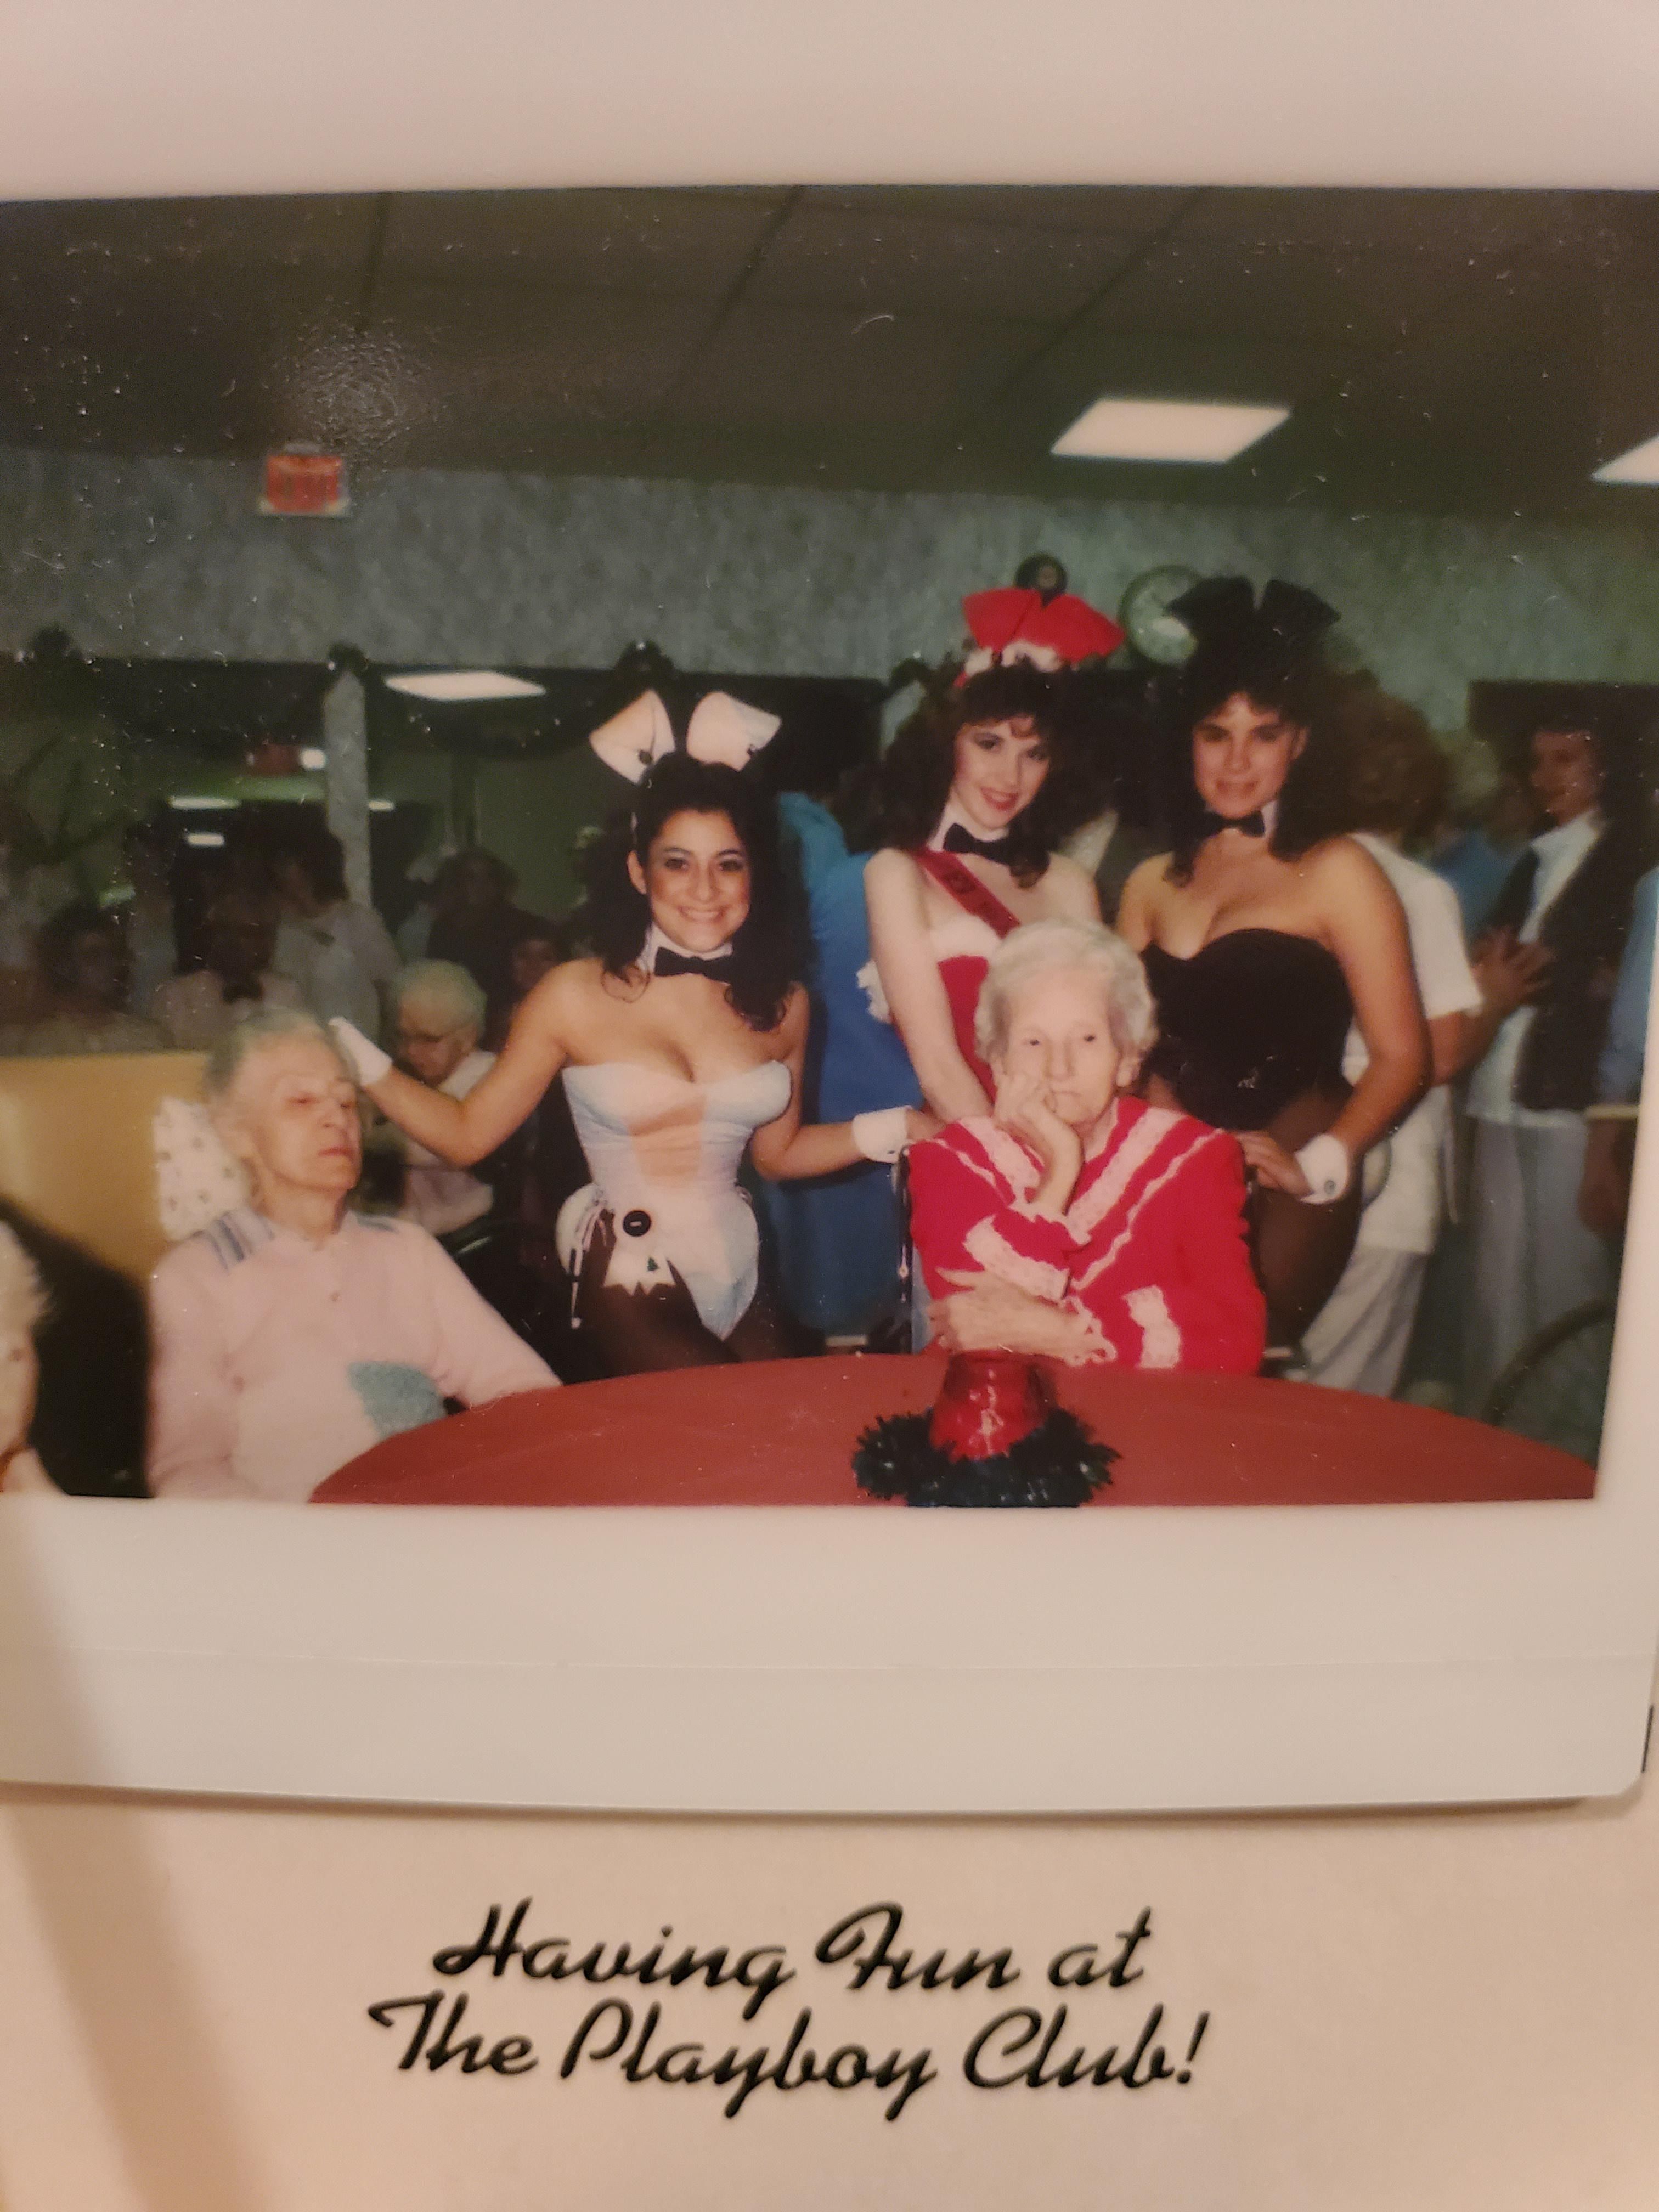 For some reason my Great Great Grandmother's Nursing Home was vistes by Playboy Bunnies in the 80's. She is clearly having none of it.